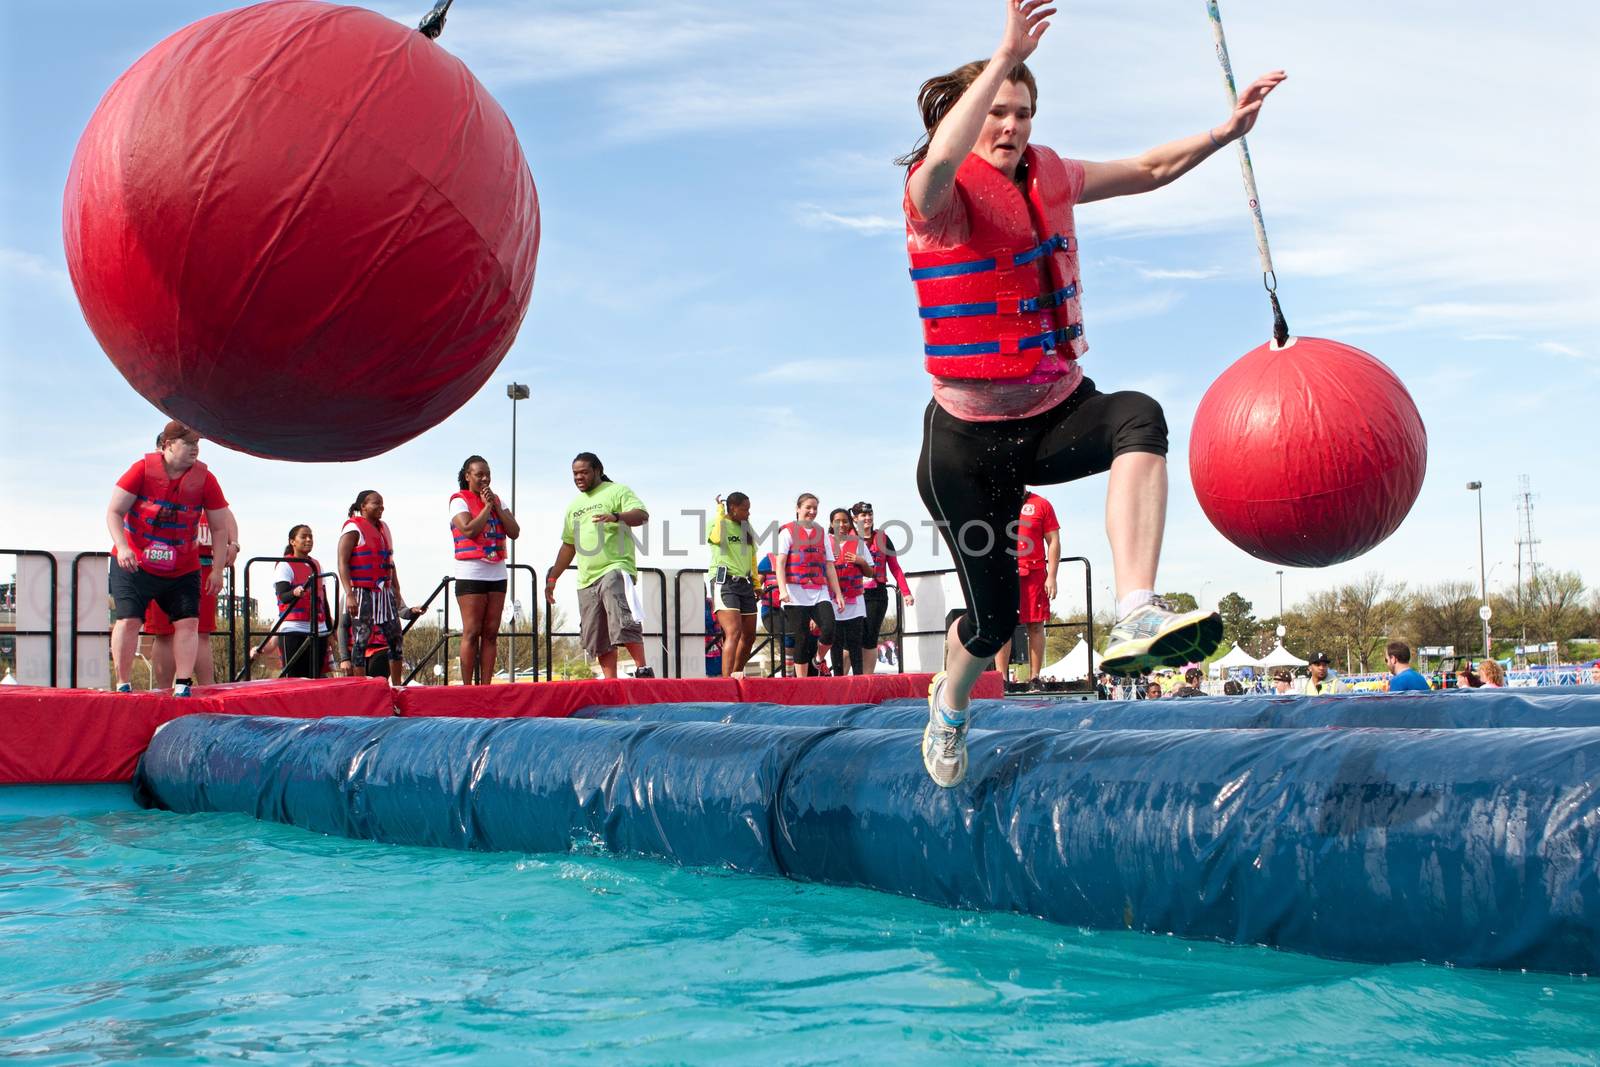 Woman Falls Into Water At Crazy Obstacle Course Race by BluIz60